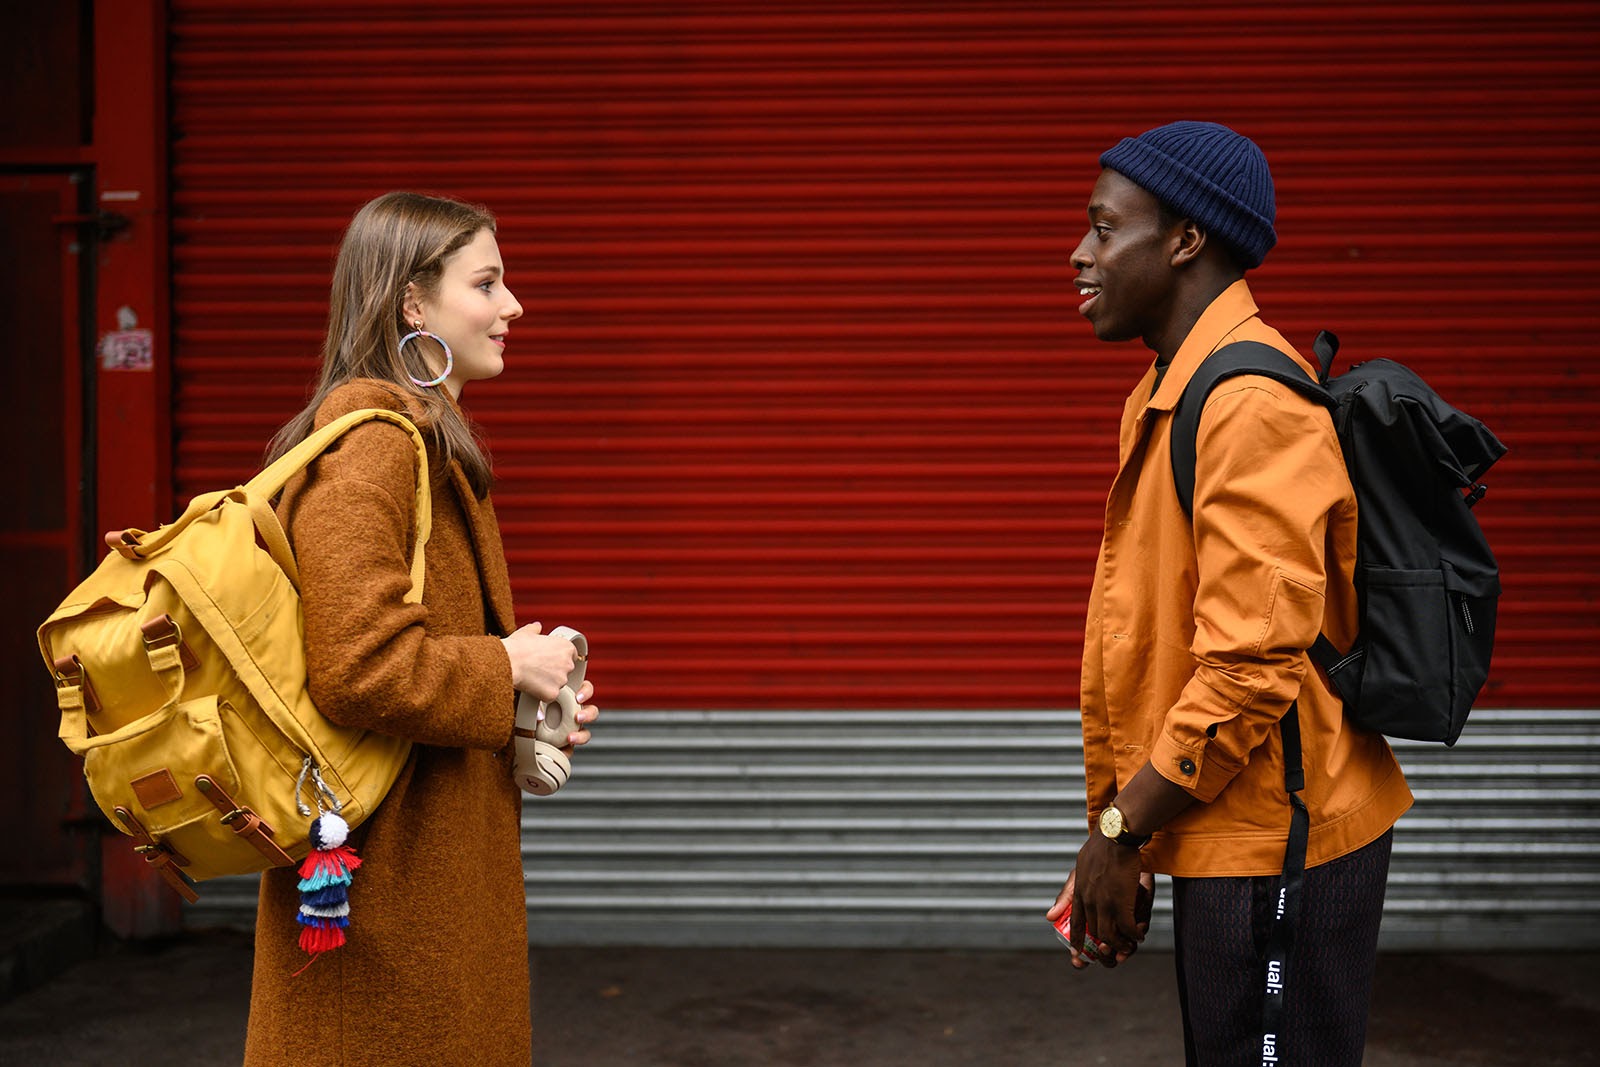 Thomasin McKenzie as Eloise with Michael Ajao as her classmate John in Last Night in Soho. Image © Focus Features